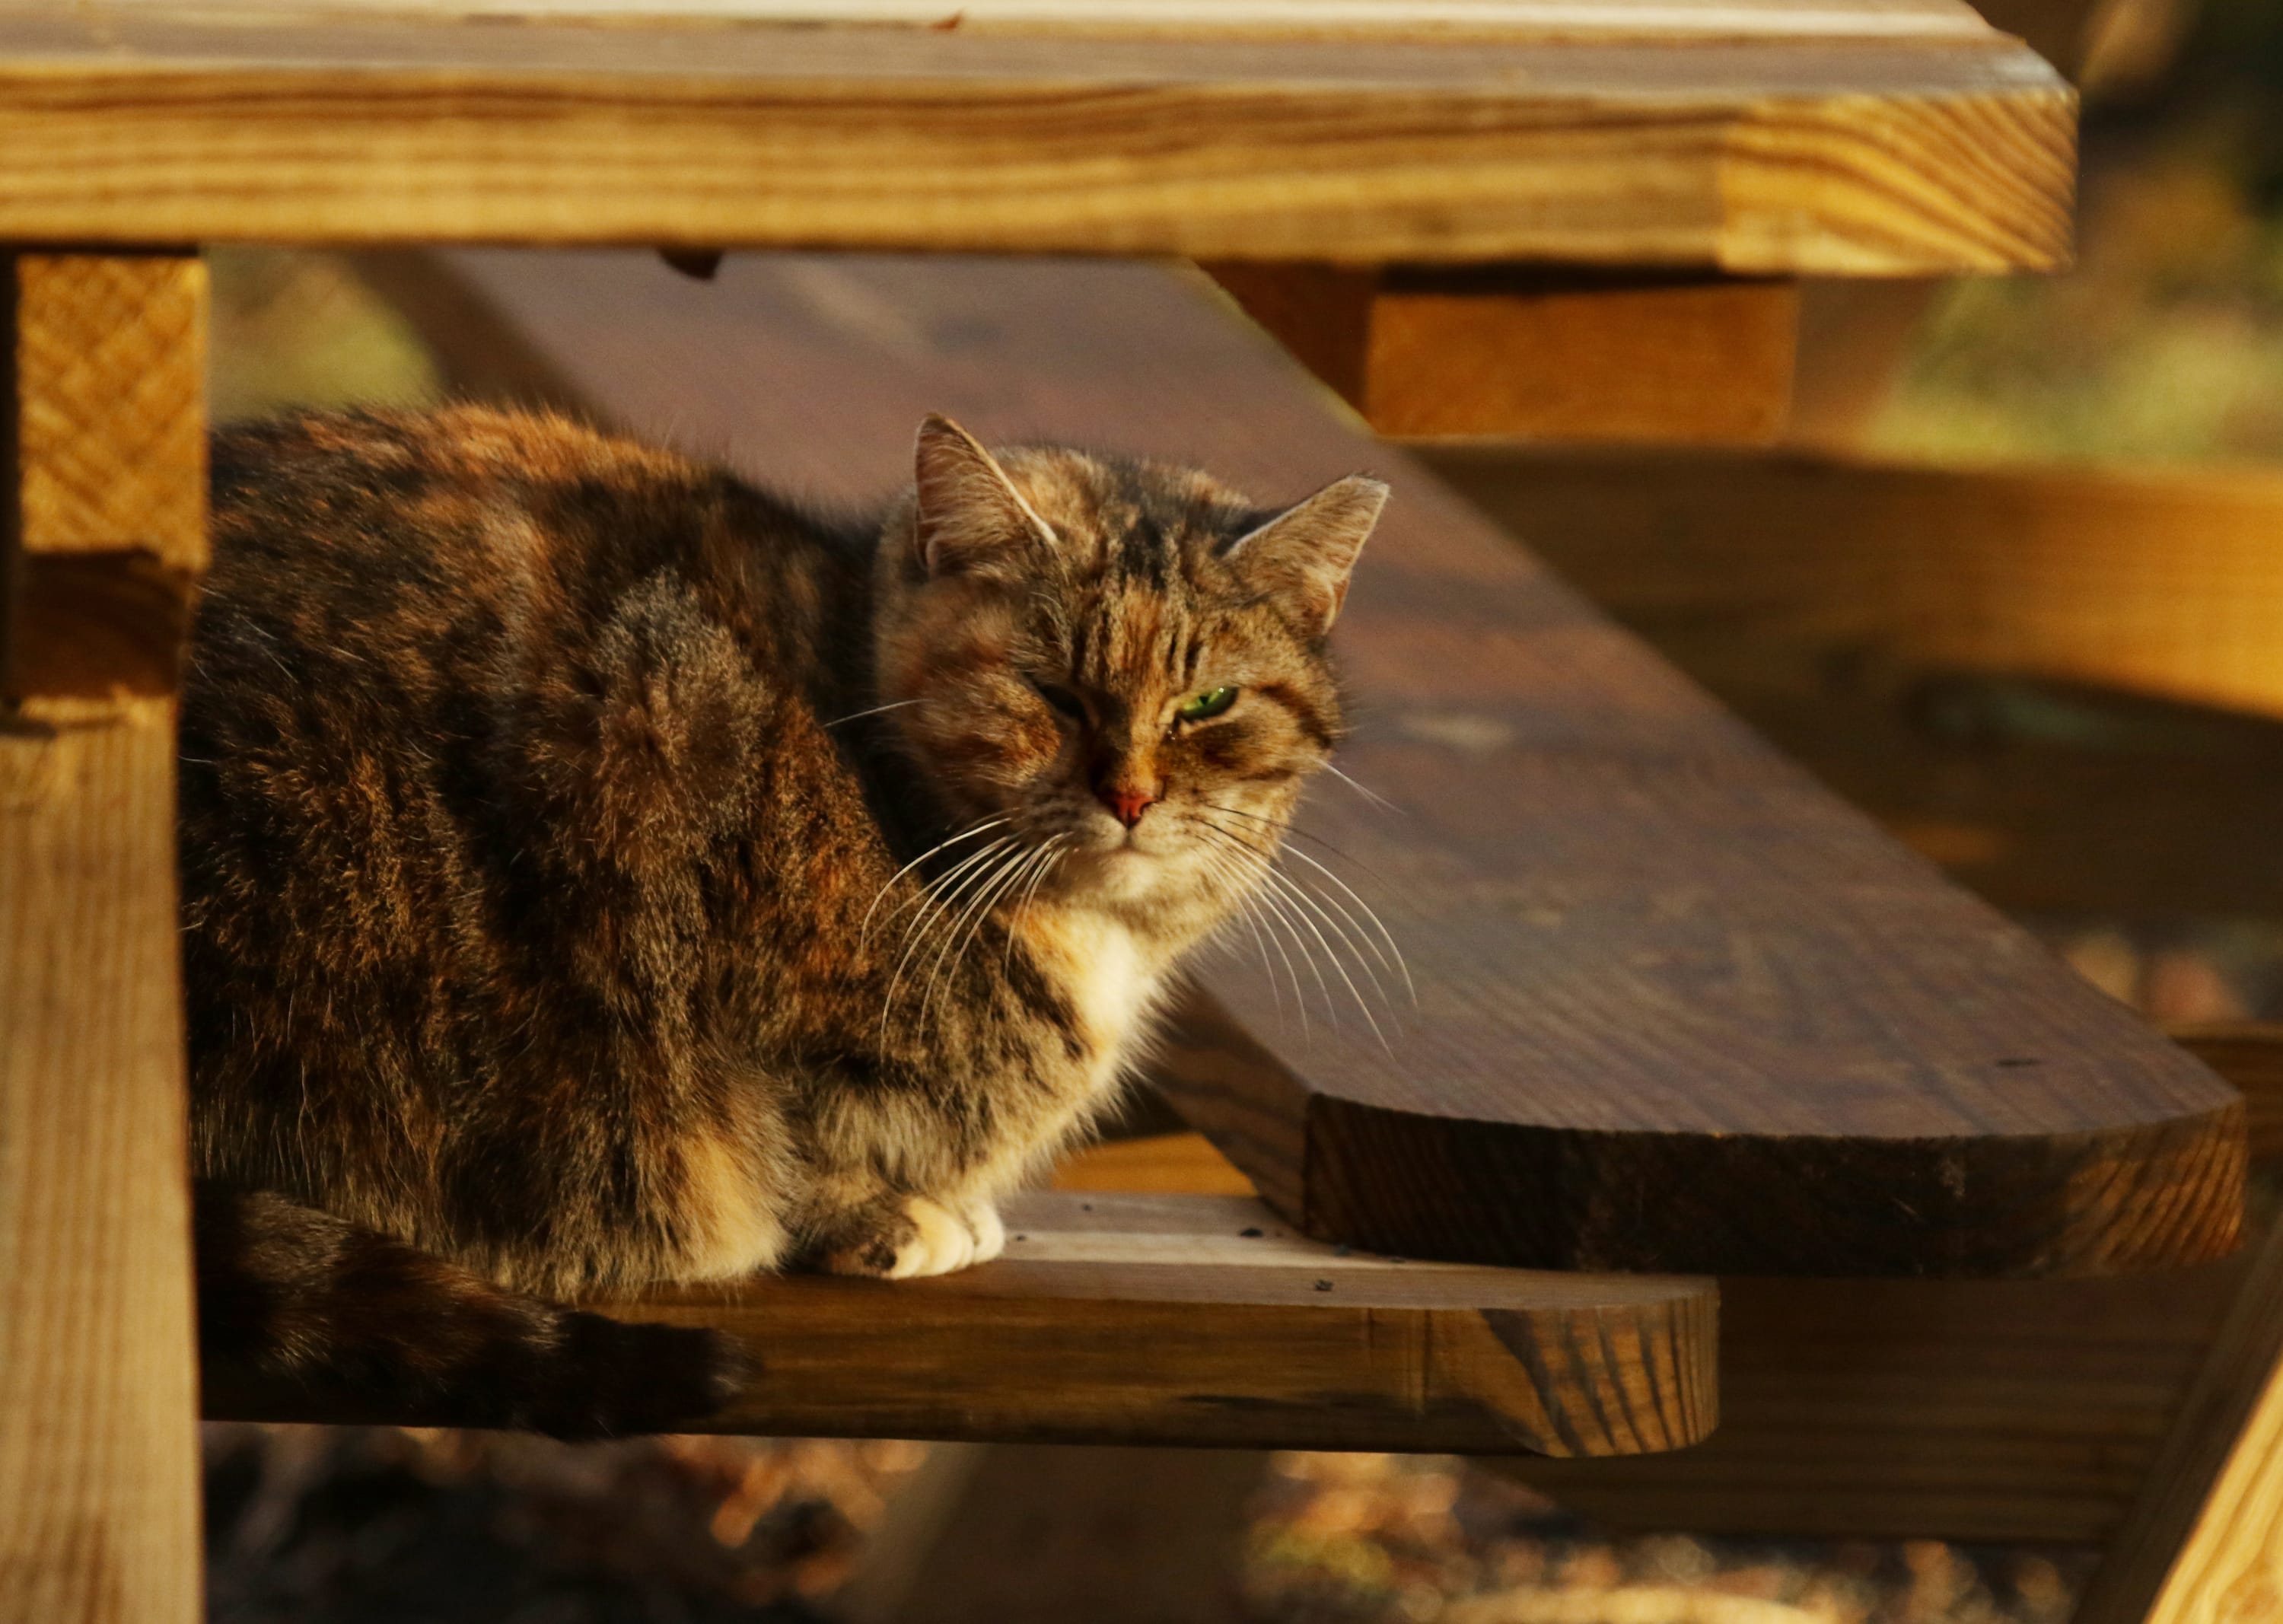 One of the Hillandale cats sunning itself on a picnic table.